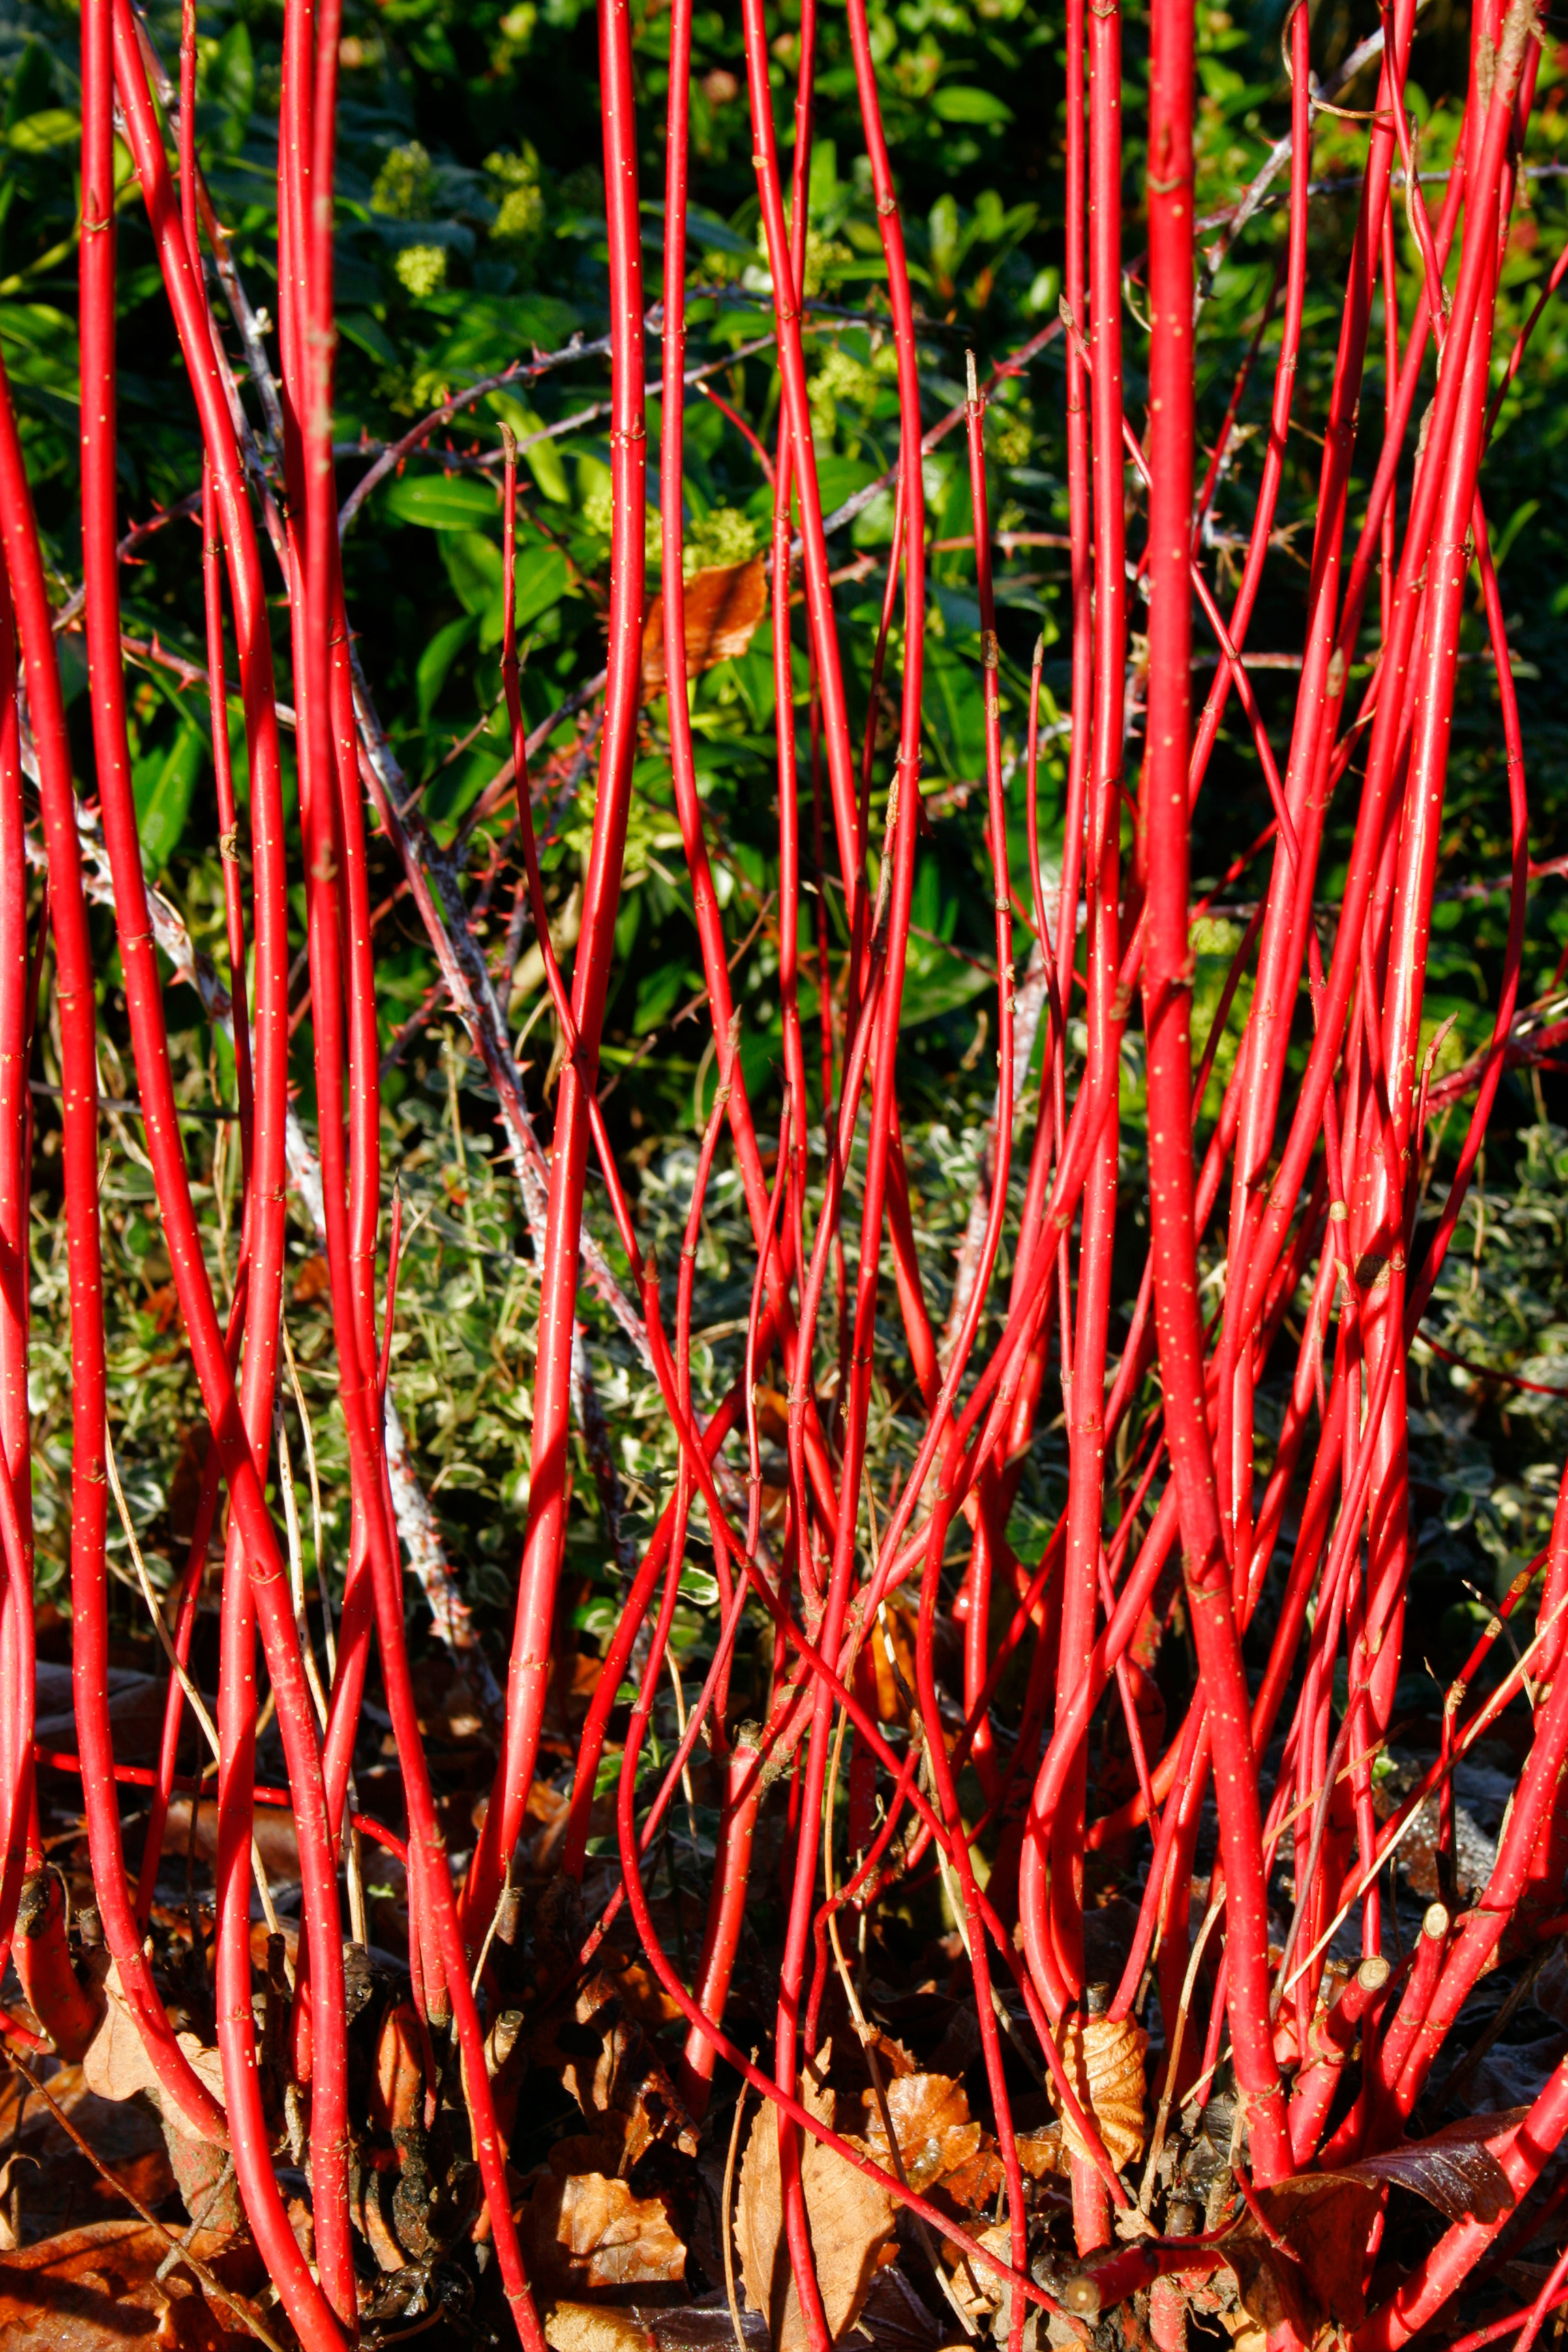 Dogwood stems for use in a wreath (Alamy/PA)